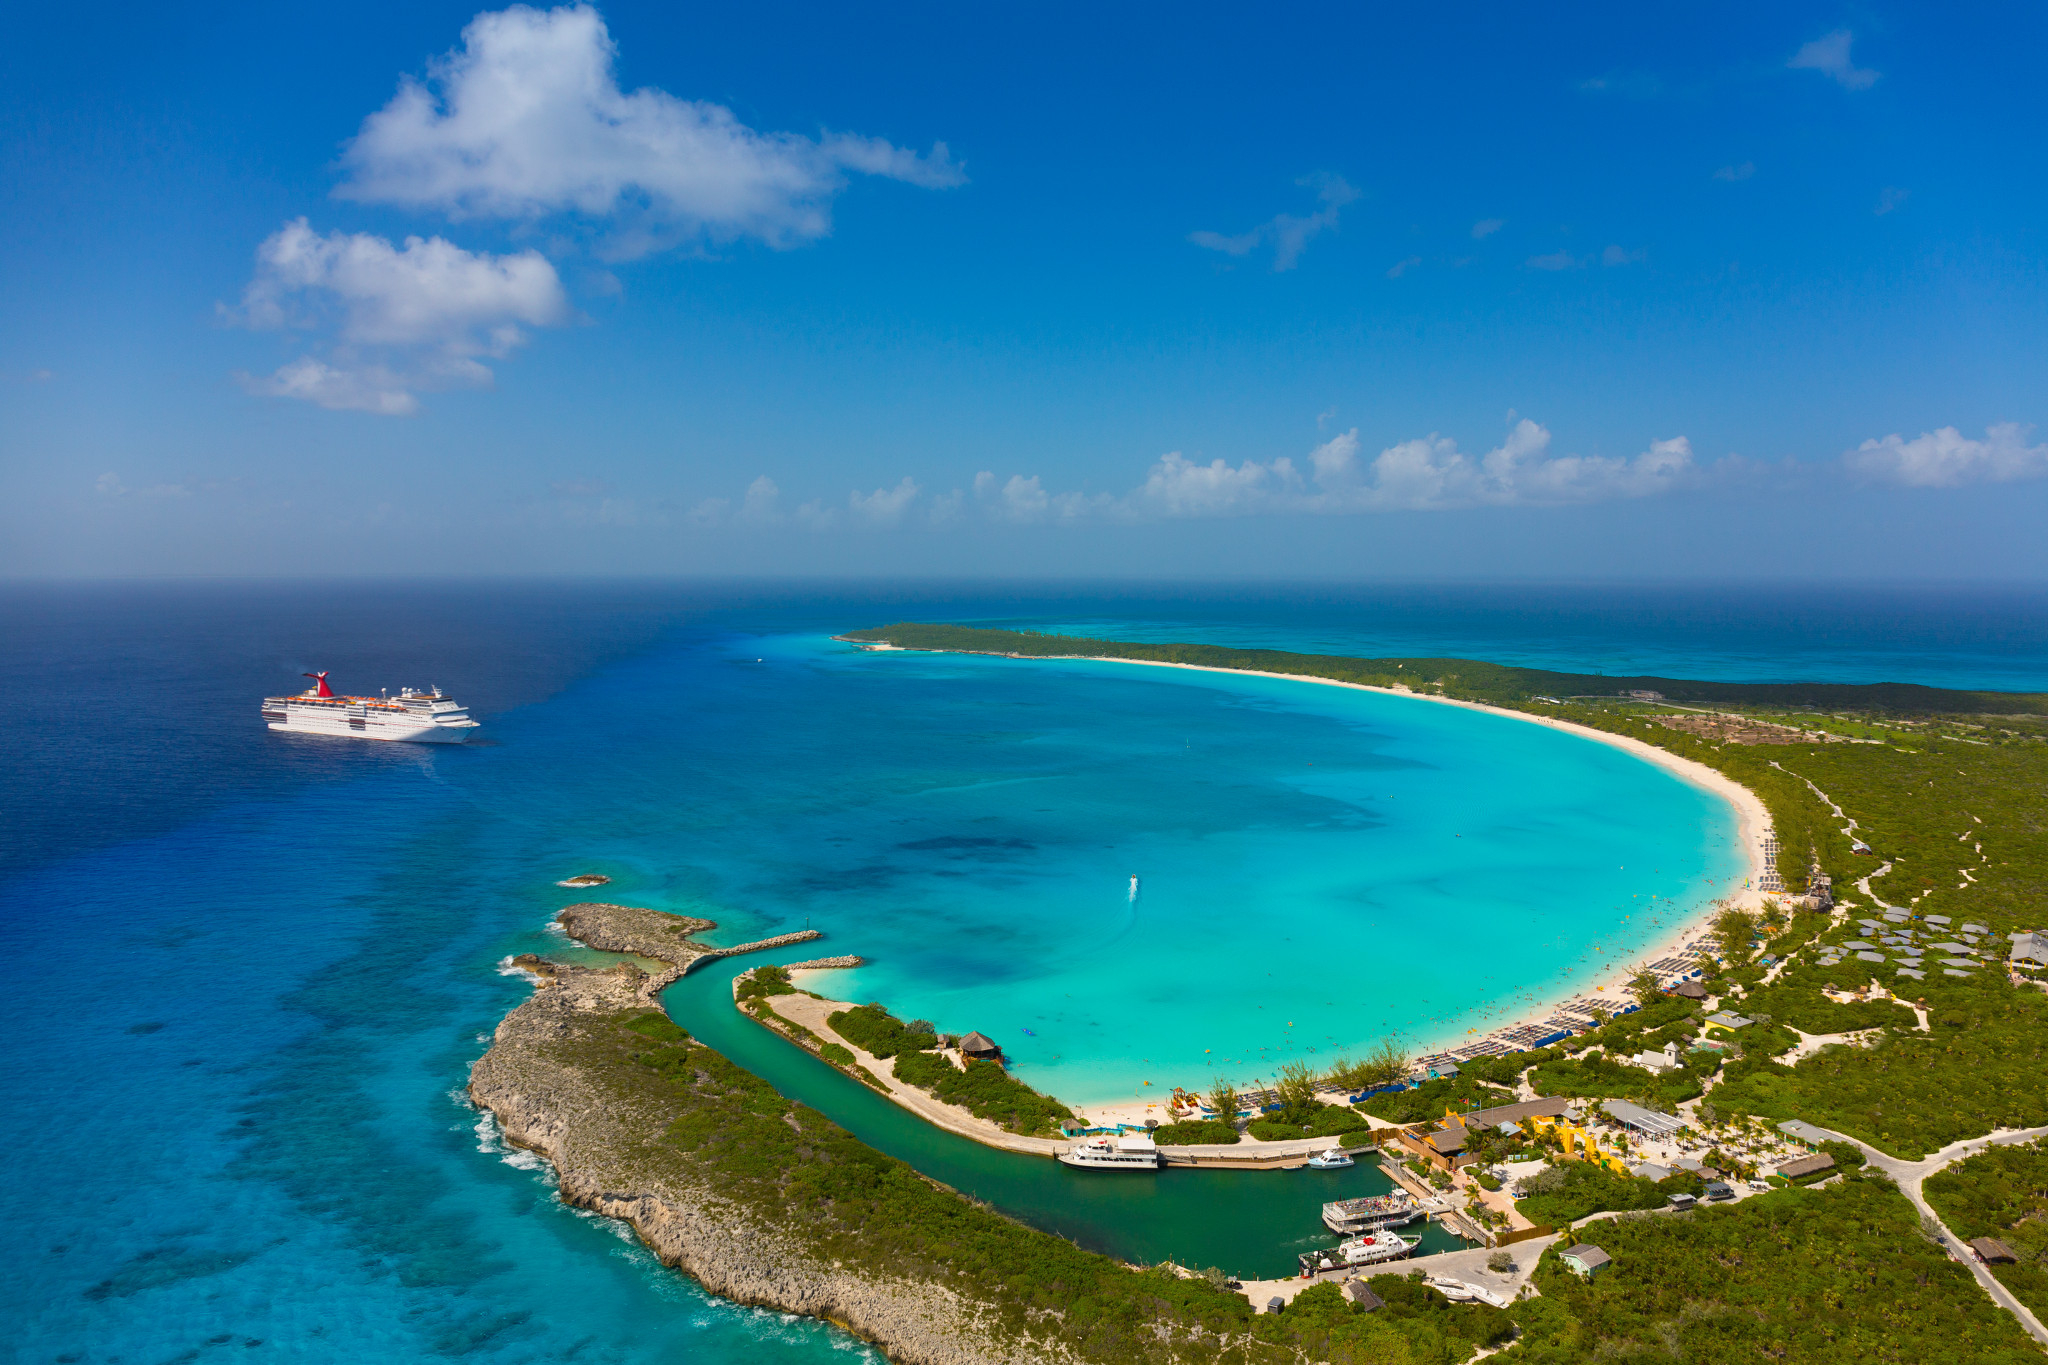 10 Essential Things to Know Before Visiting Half Moon Cay